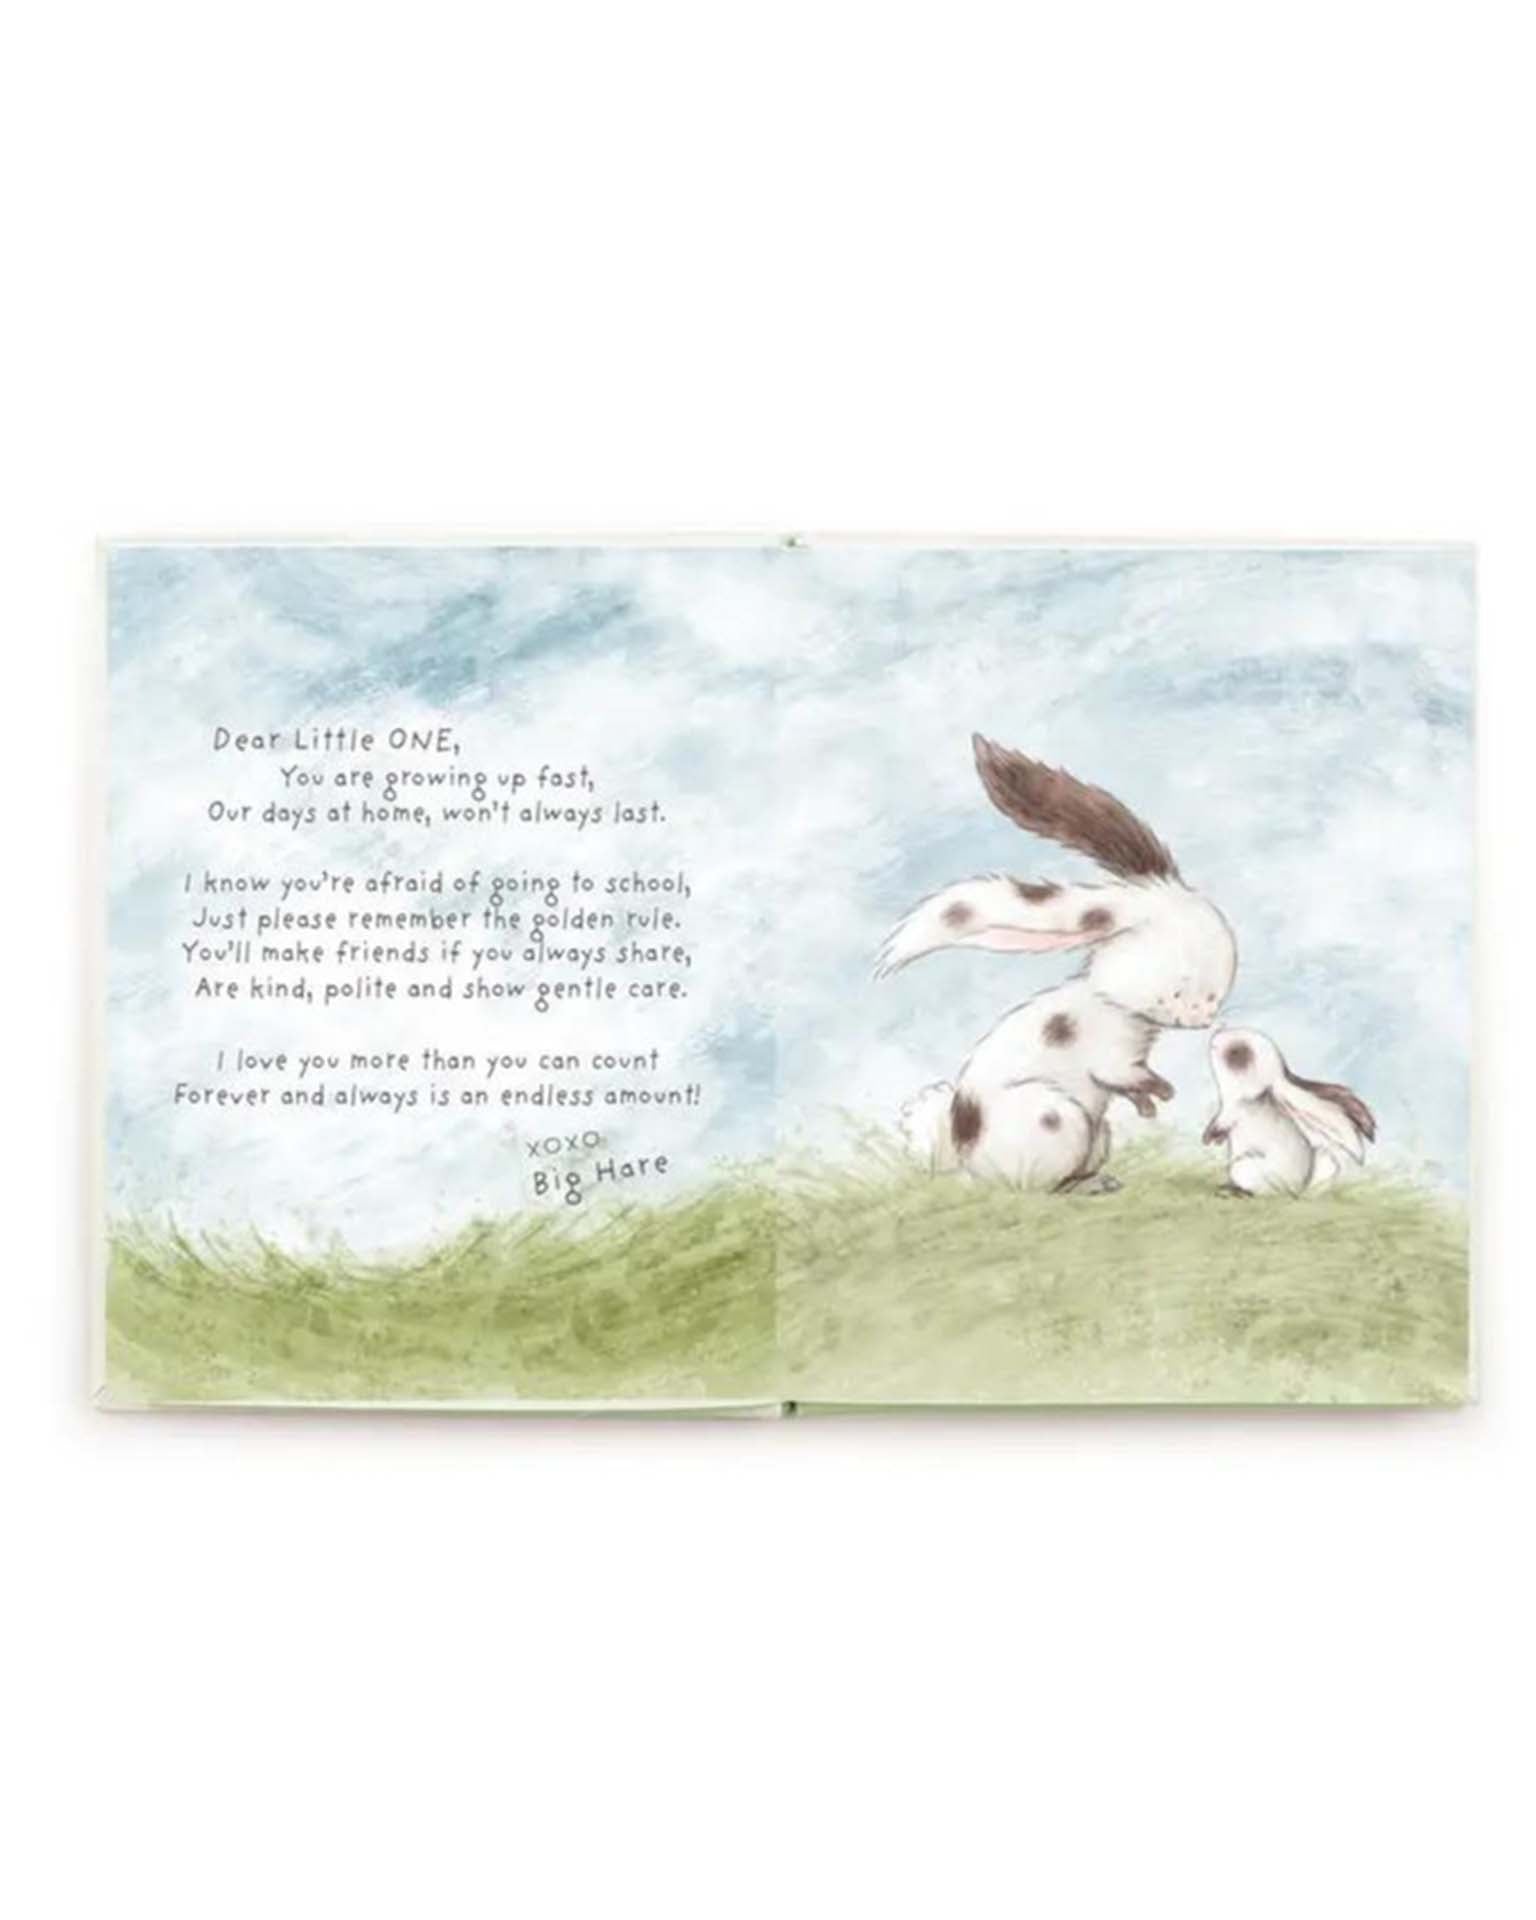 Little bunnies by the bay play every hare counts book